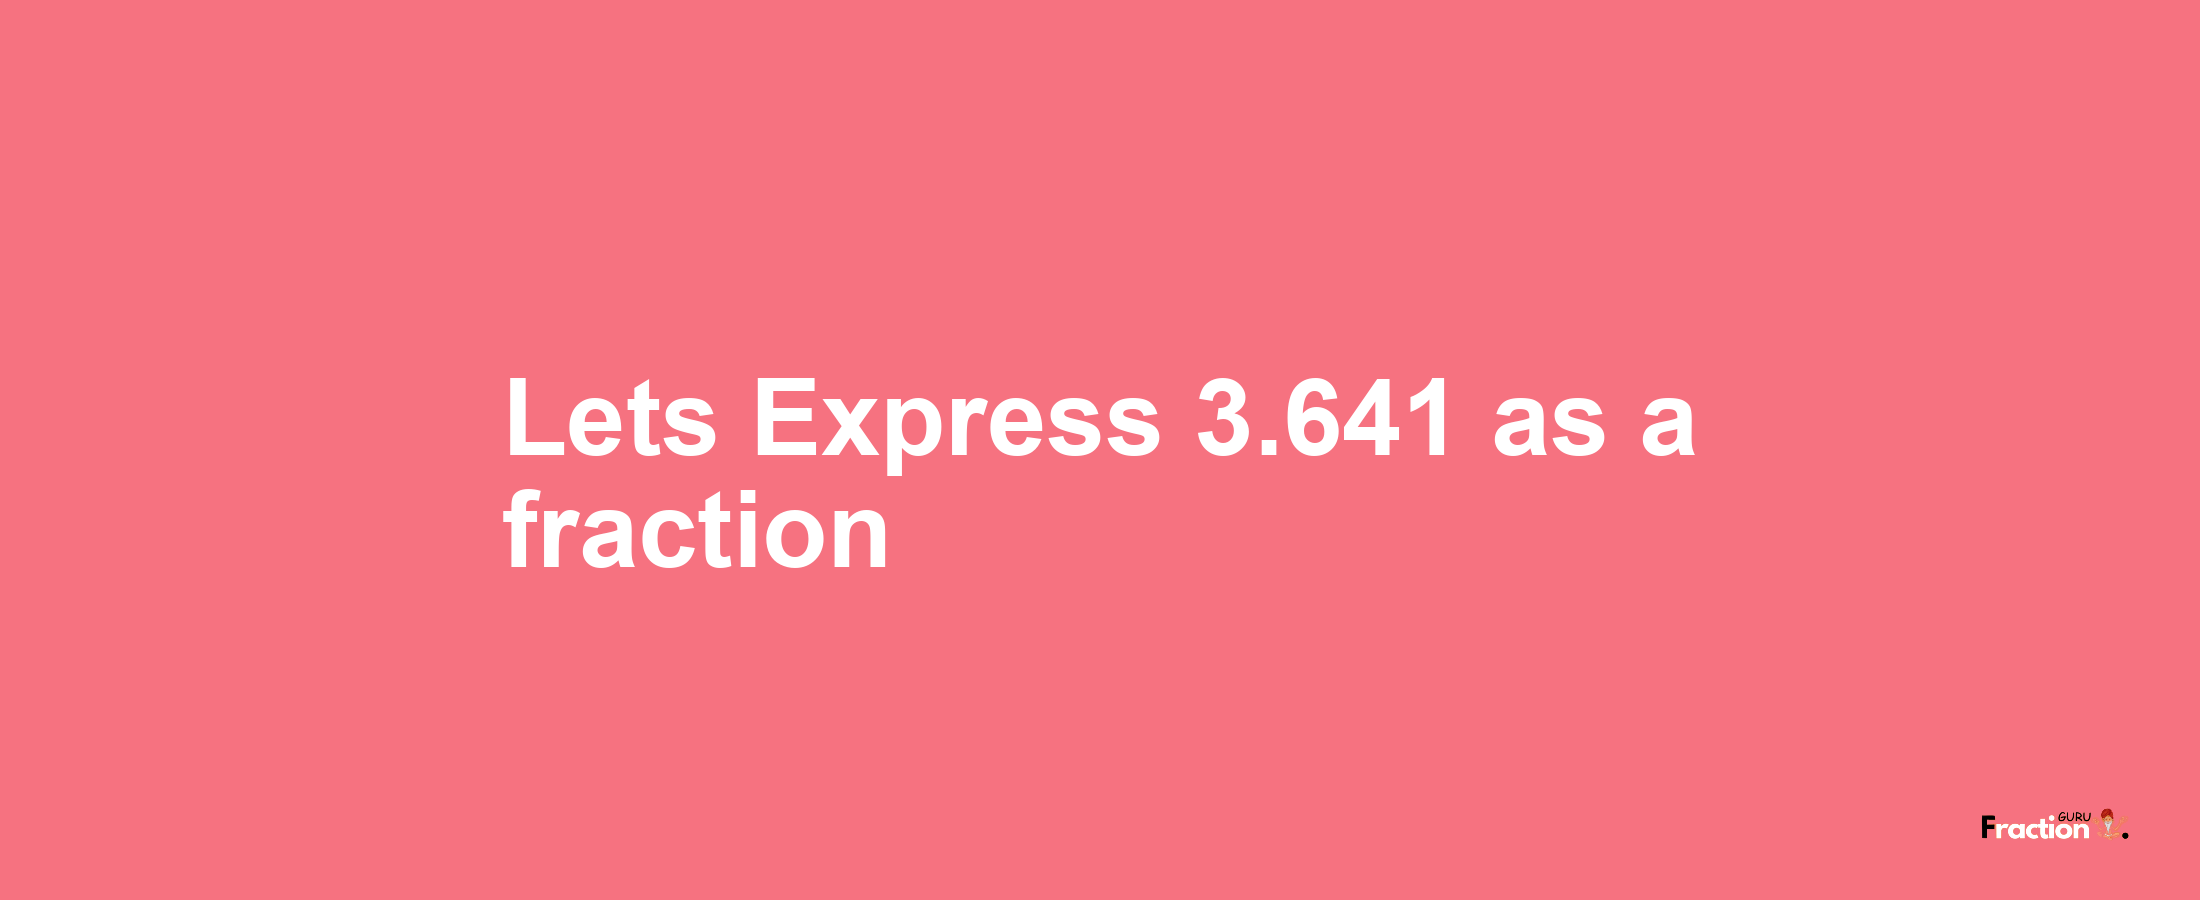 Lets Express 3.641 as afraction